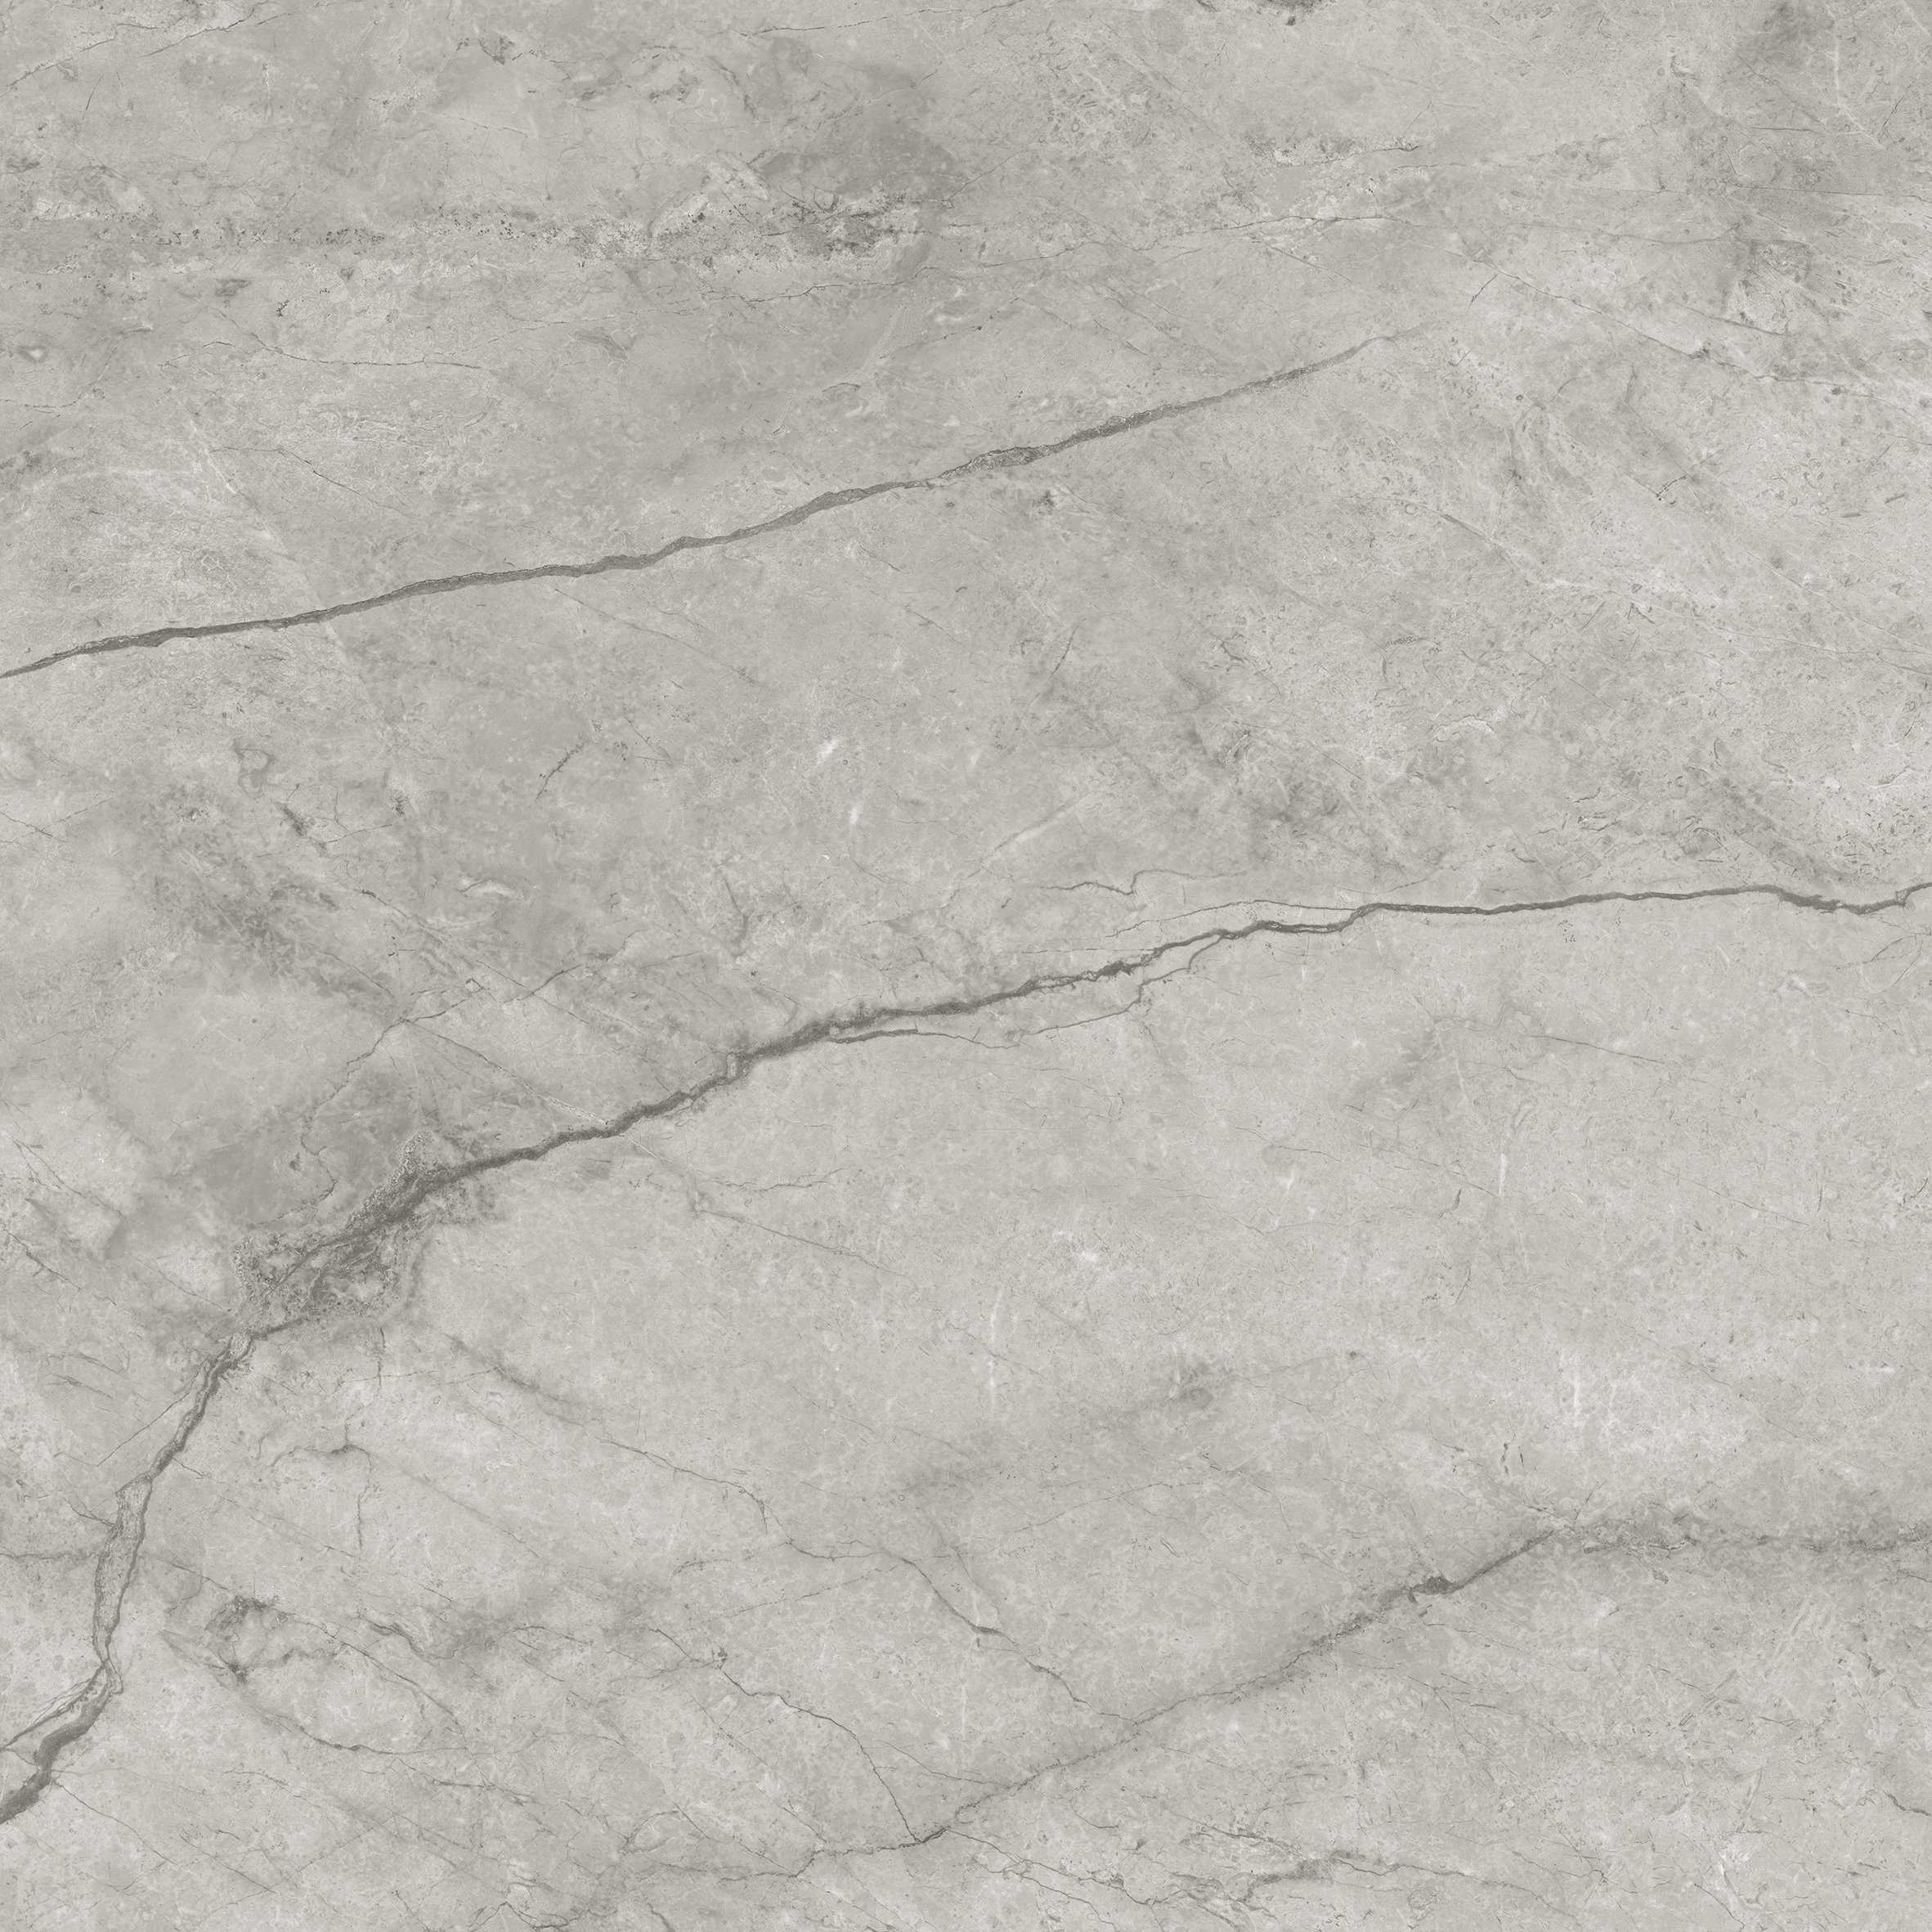 paradiso argento pattern glazed porcelain field tile from la marca anatolia collection distributed by surface group international polished finish rectified edge 32x32 square shape